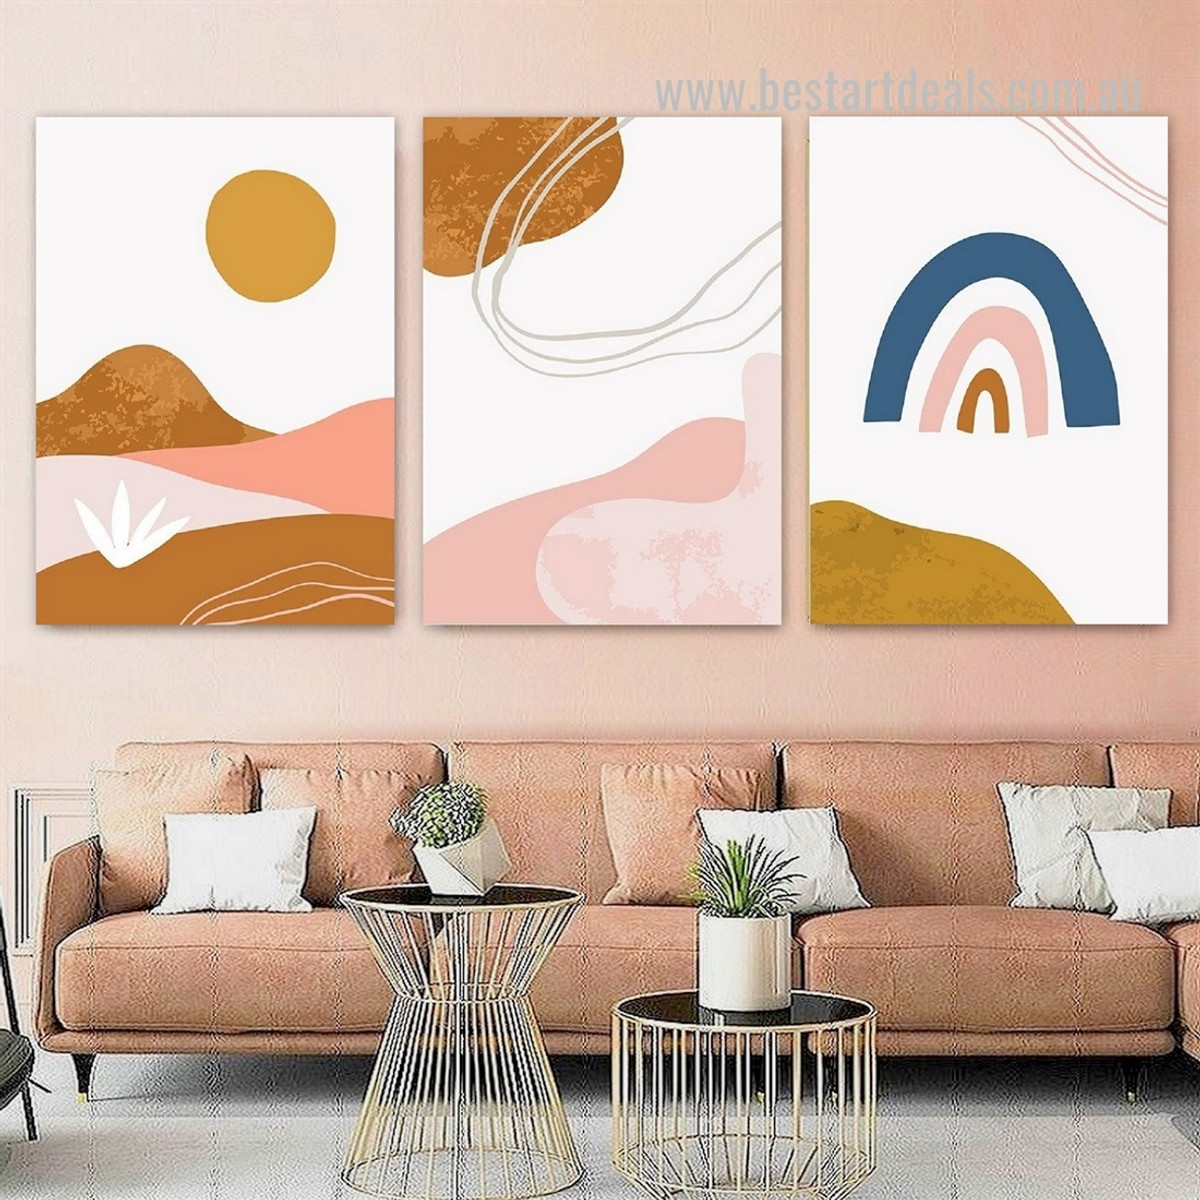 Hued Scansion Mounts Spots Scandinavian Abstract Framed Stretched Painting Pic 3 Piece Landscape Canvas Print for Room Wall Trimming